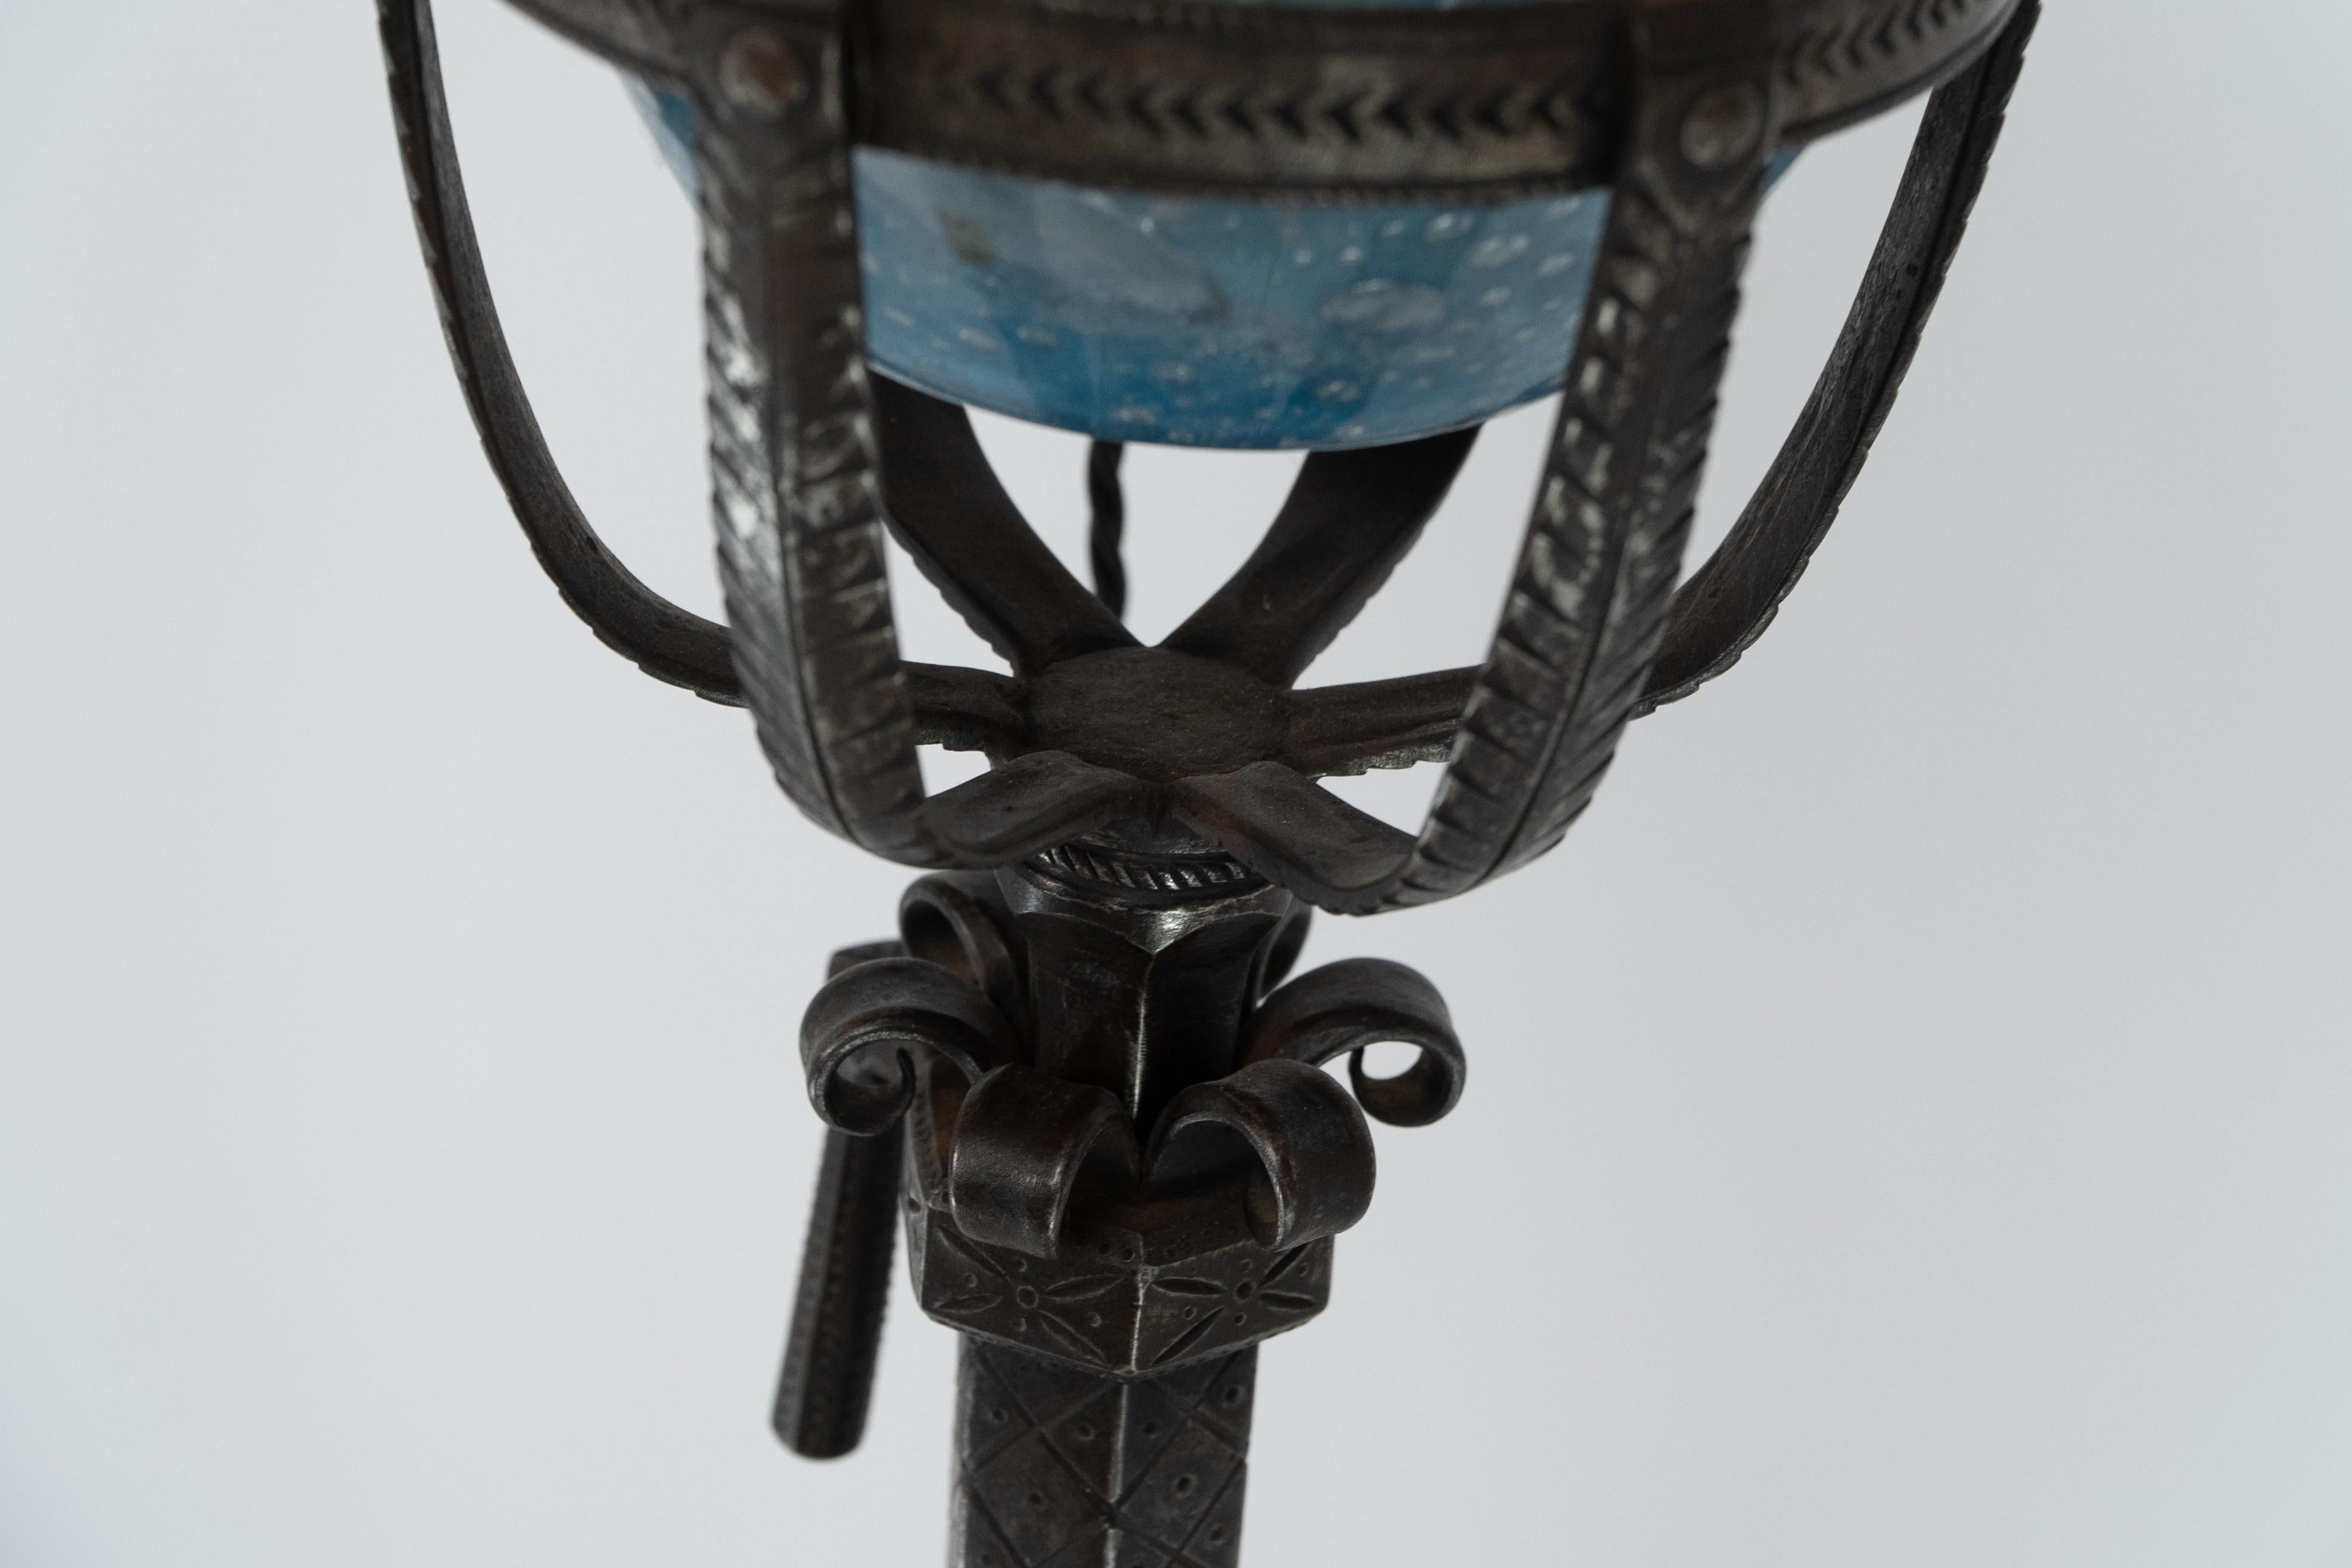 Early 20th Century Alfred Bucknell. A handmade steel standard lamp with finely chased details. For Sale